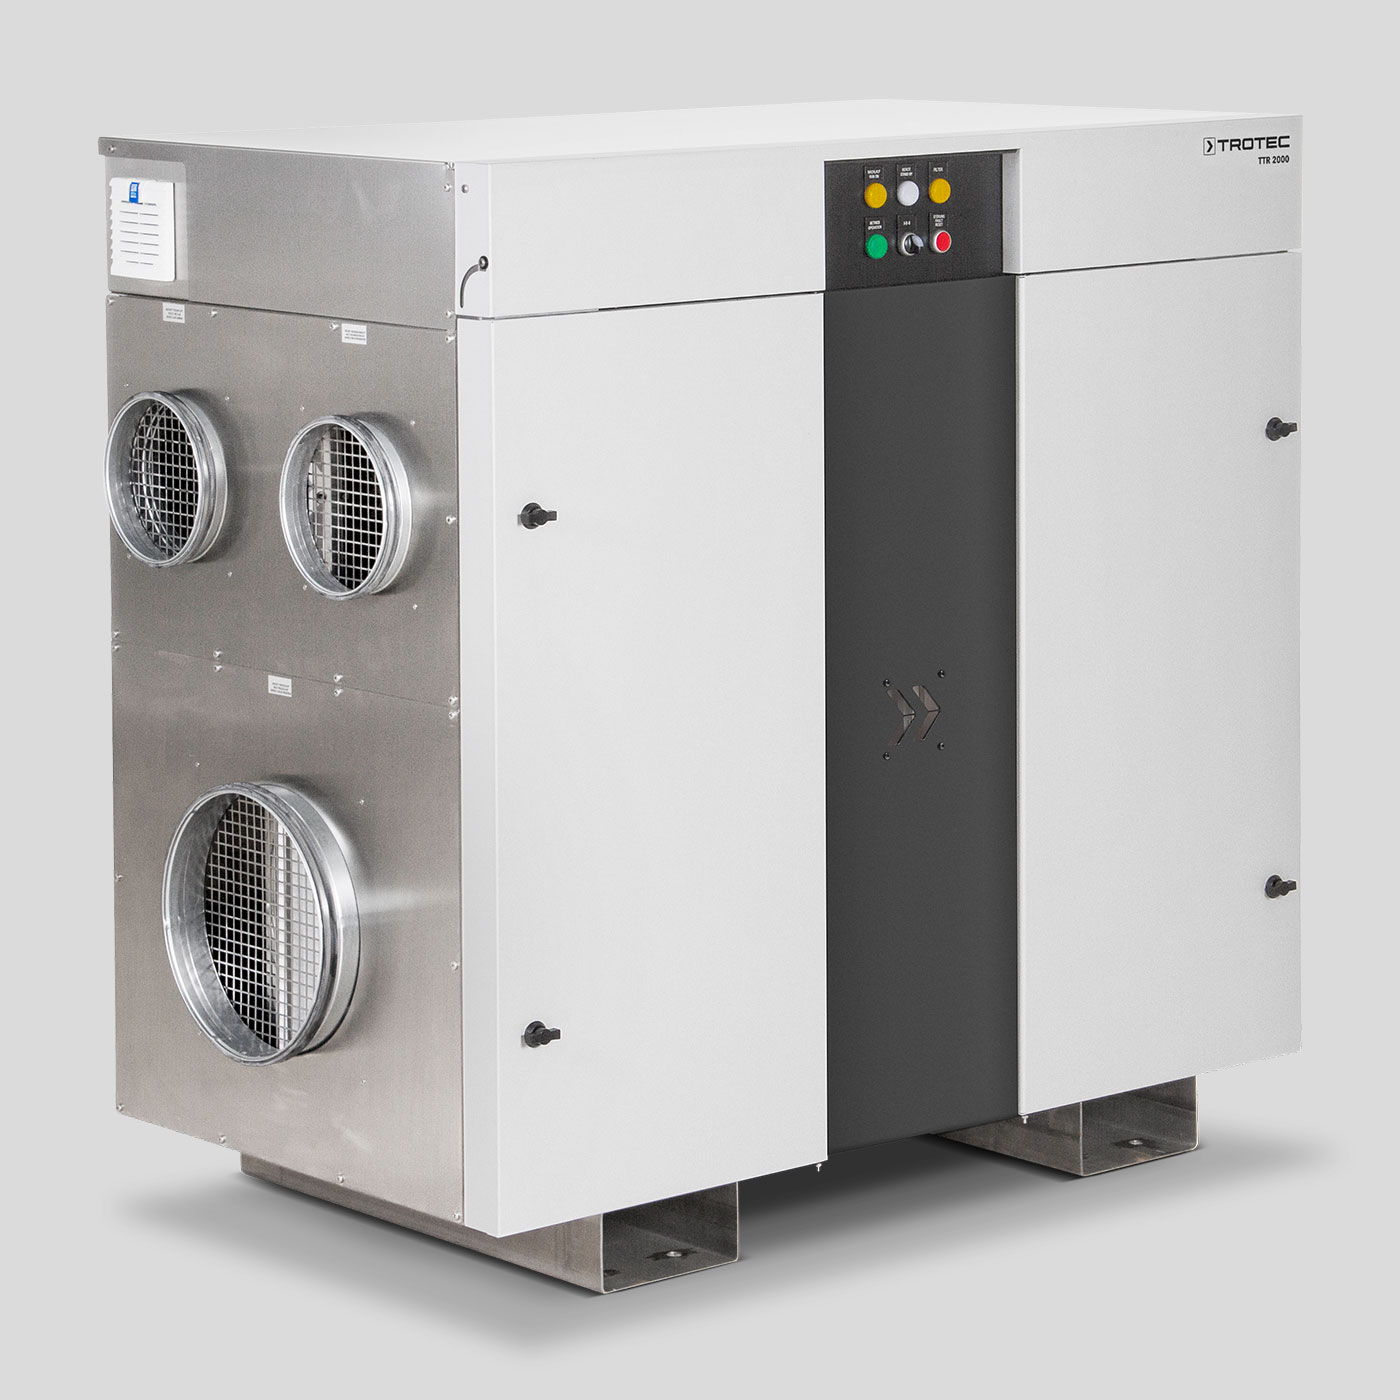 TTR 2000 with robust stainless steel housing